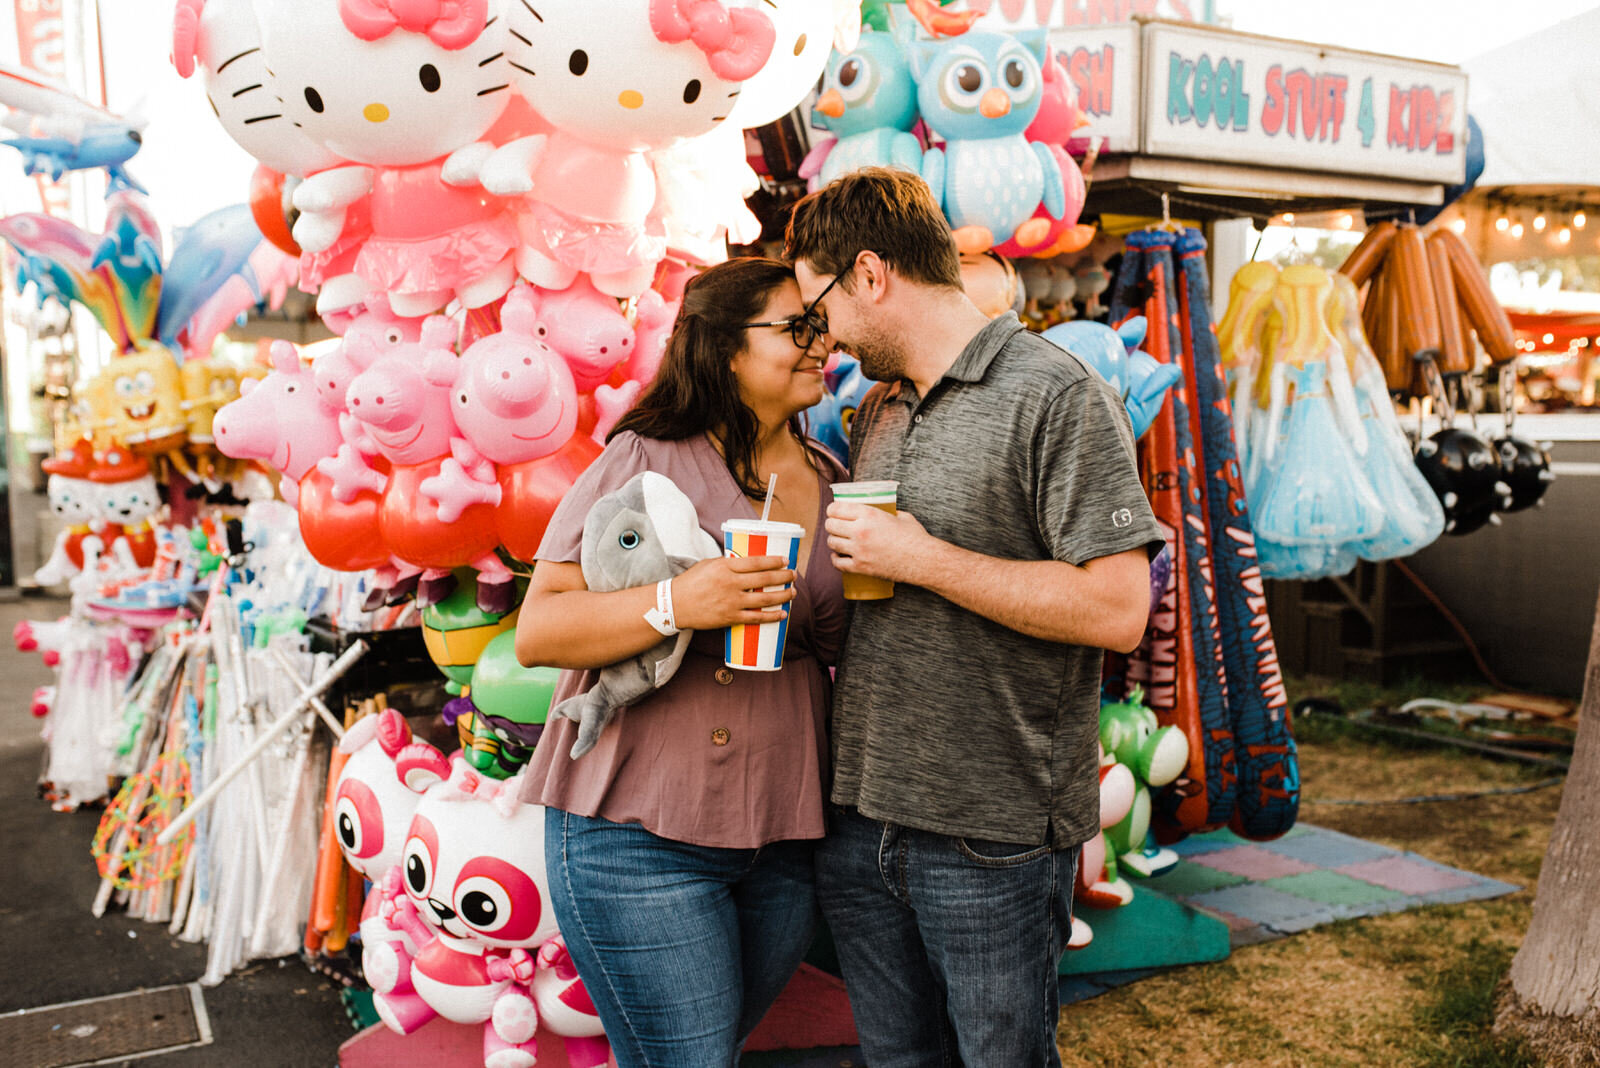 Cute and colorful engagement photos at Orange County Fair 